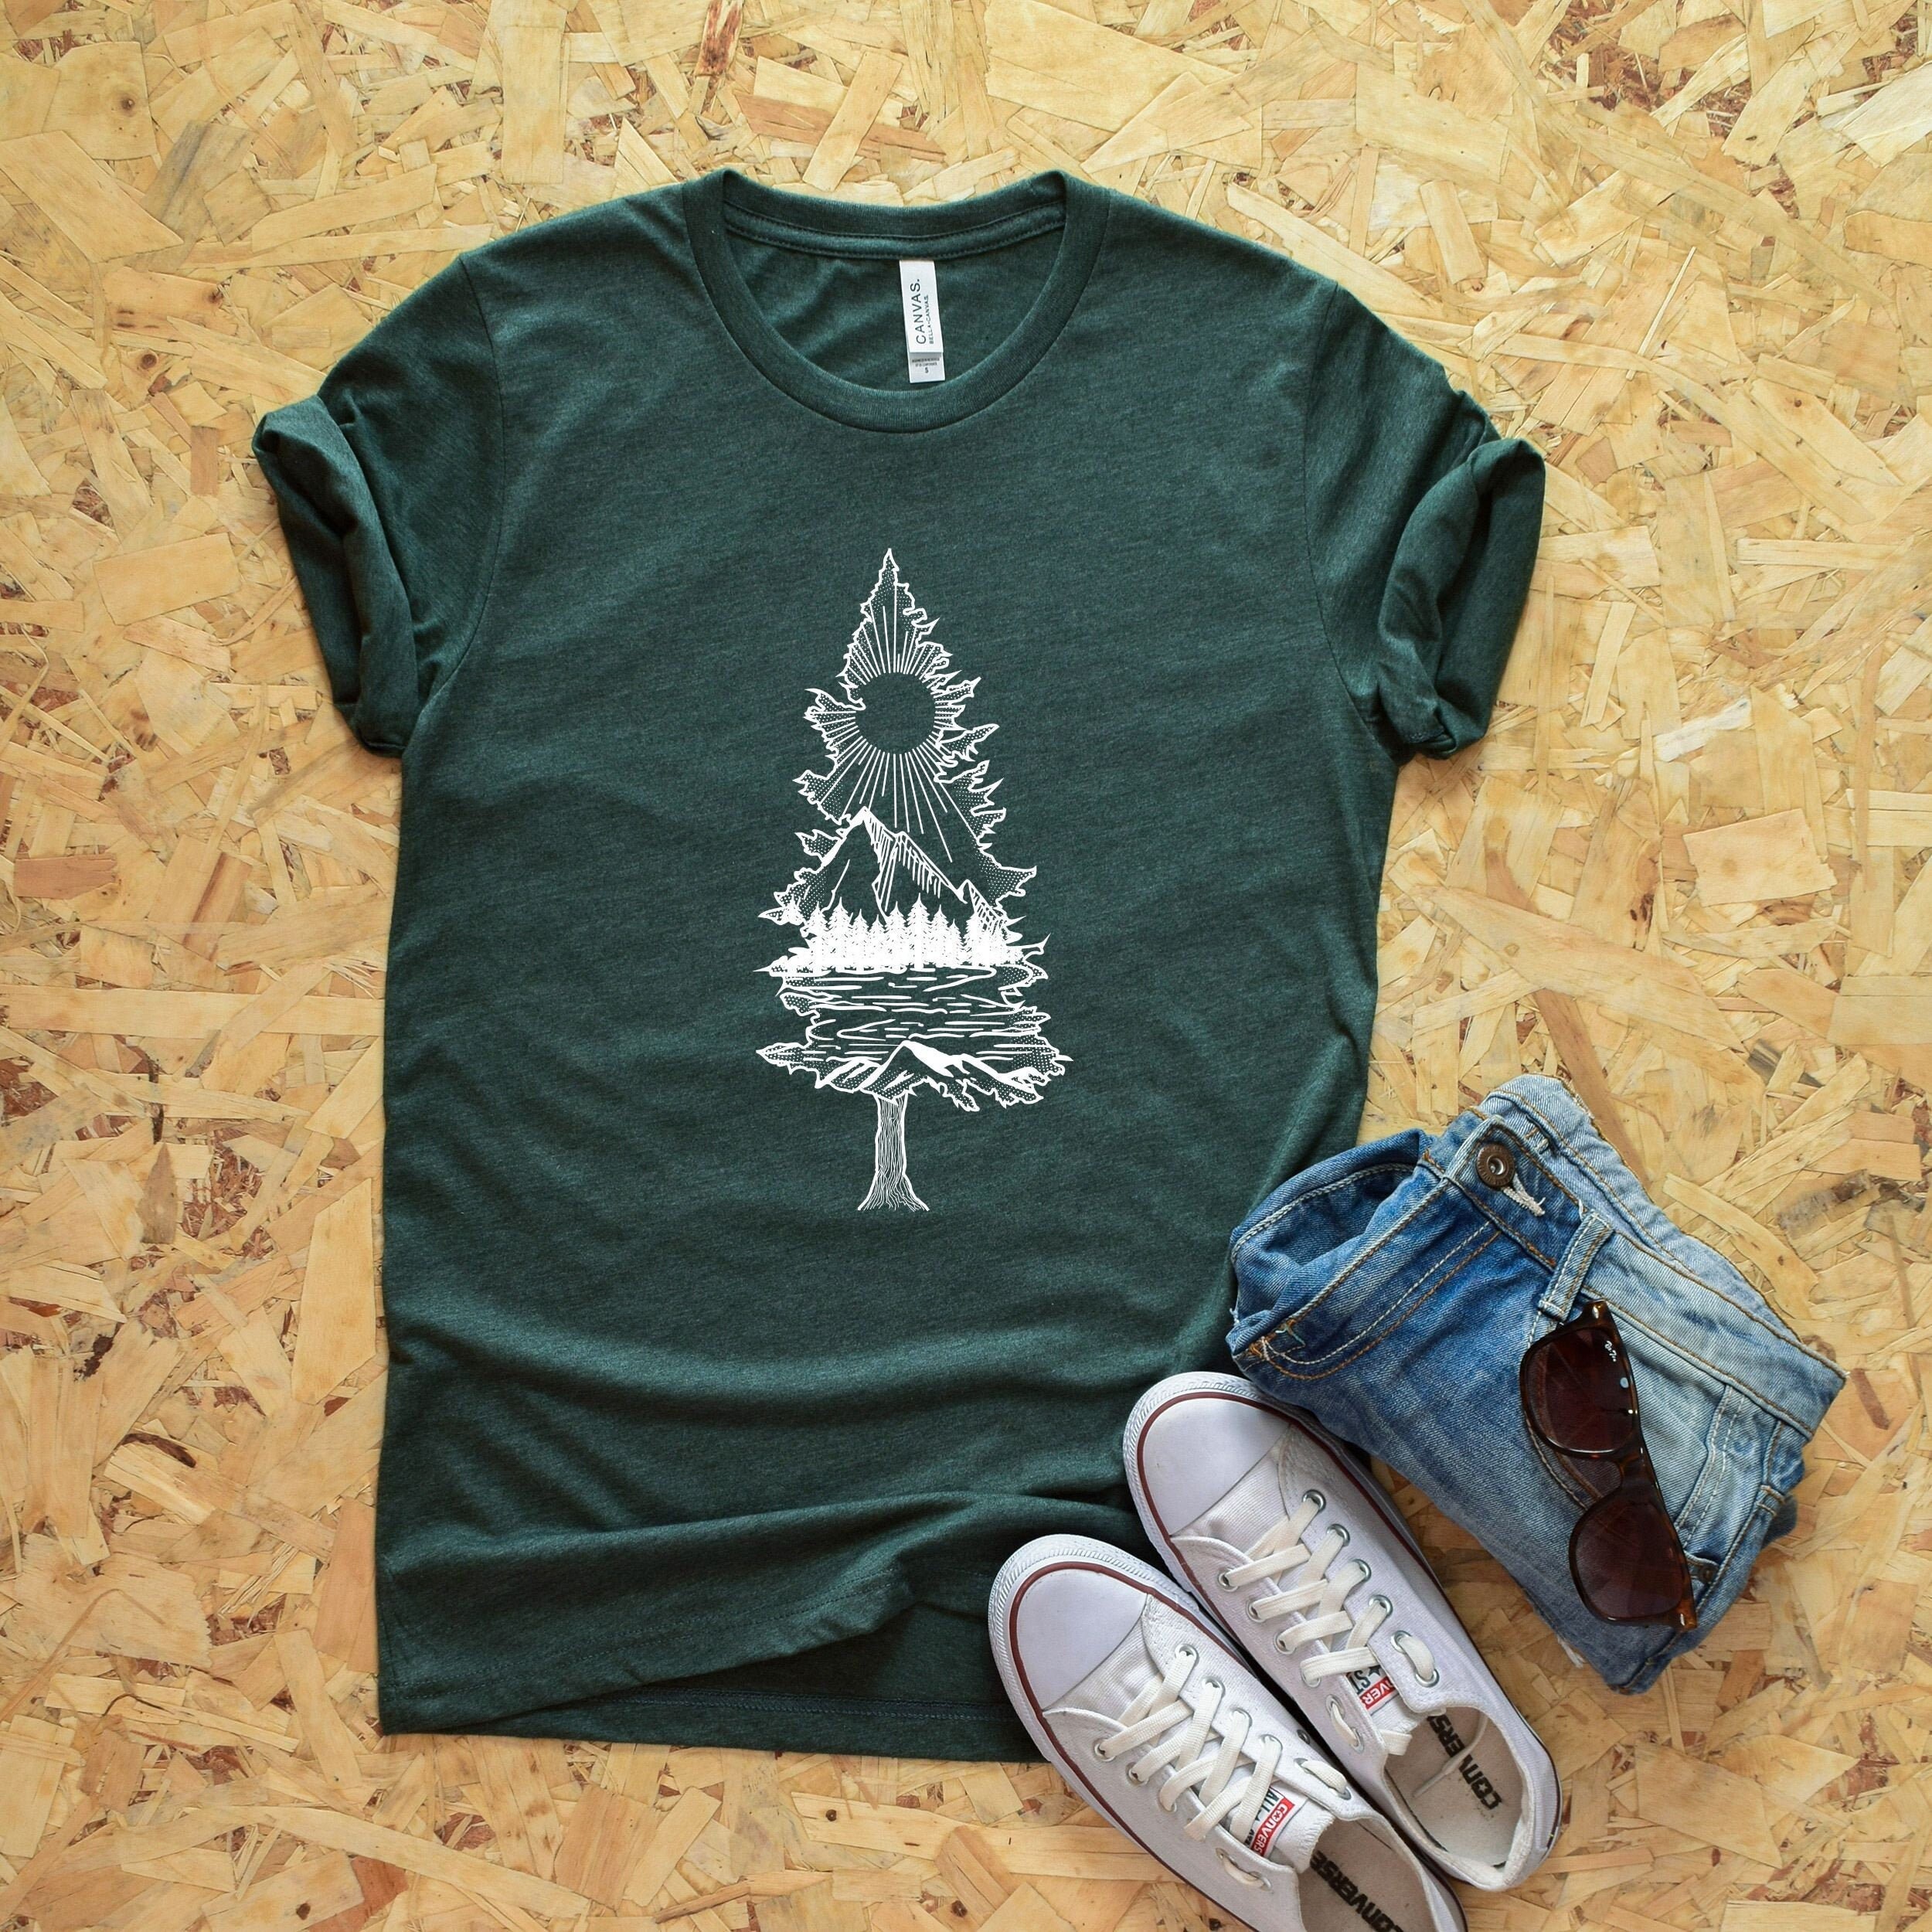 National Parks Tee Tree Rings T-Shirt Gift for Nature Lover Pacific Northwest Shirt Pine Tree Shirt Camping Shirt Mountain Shirt